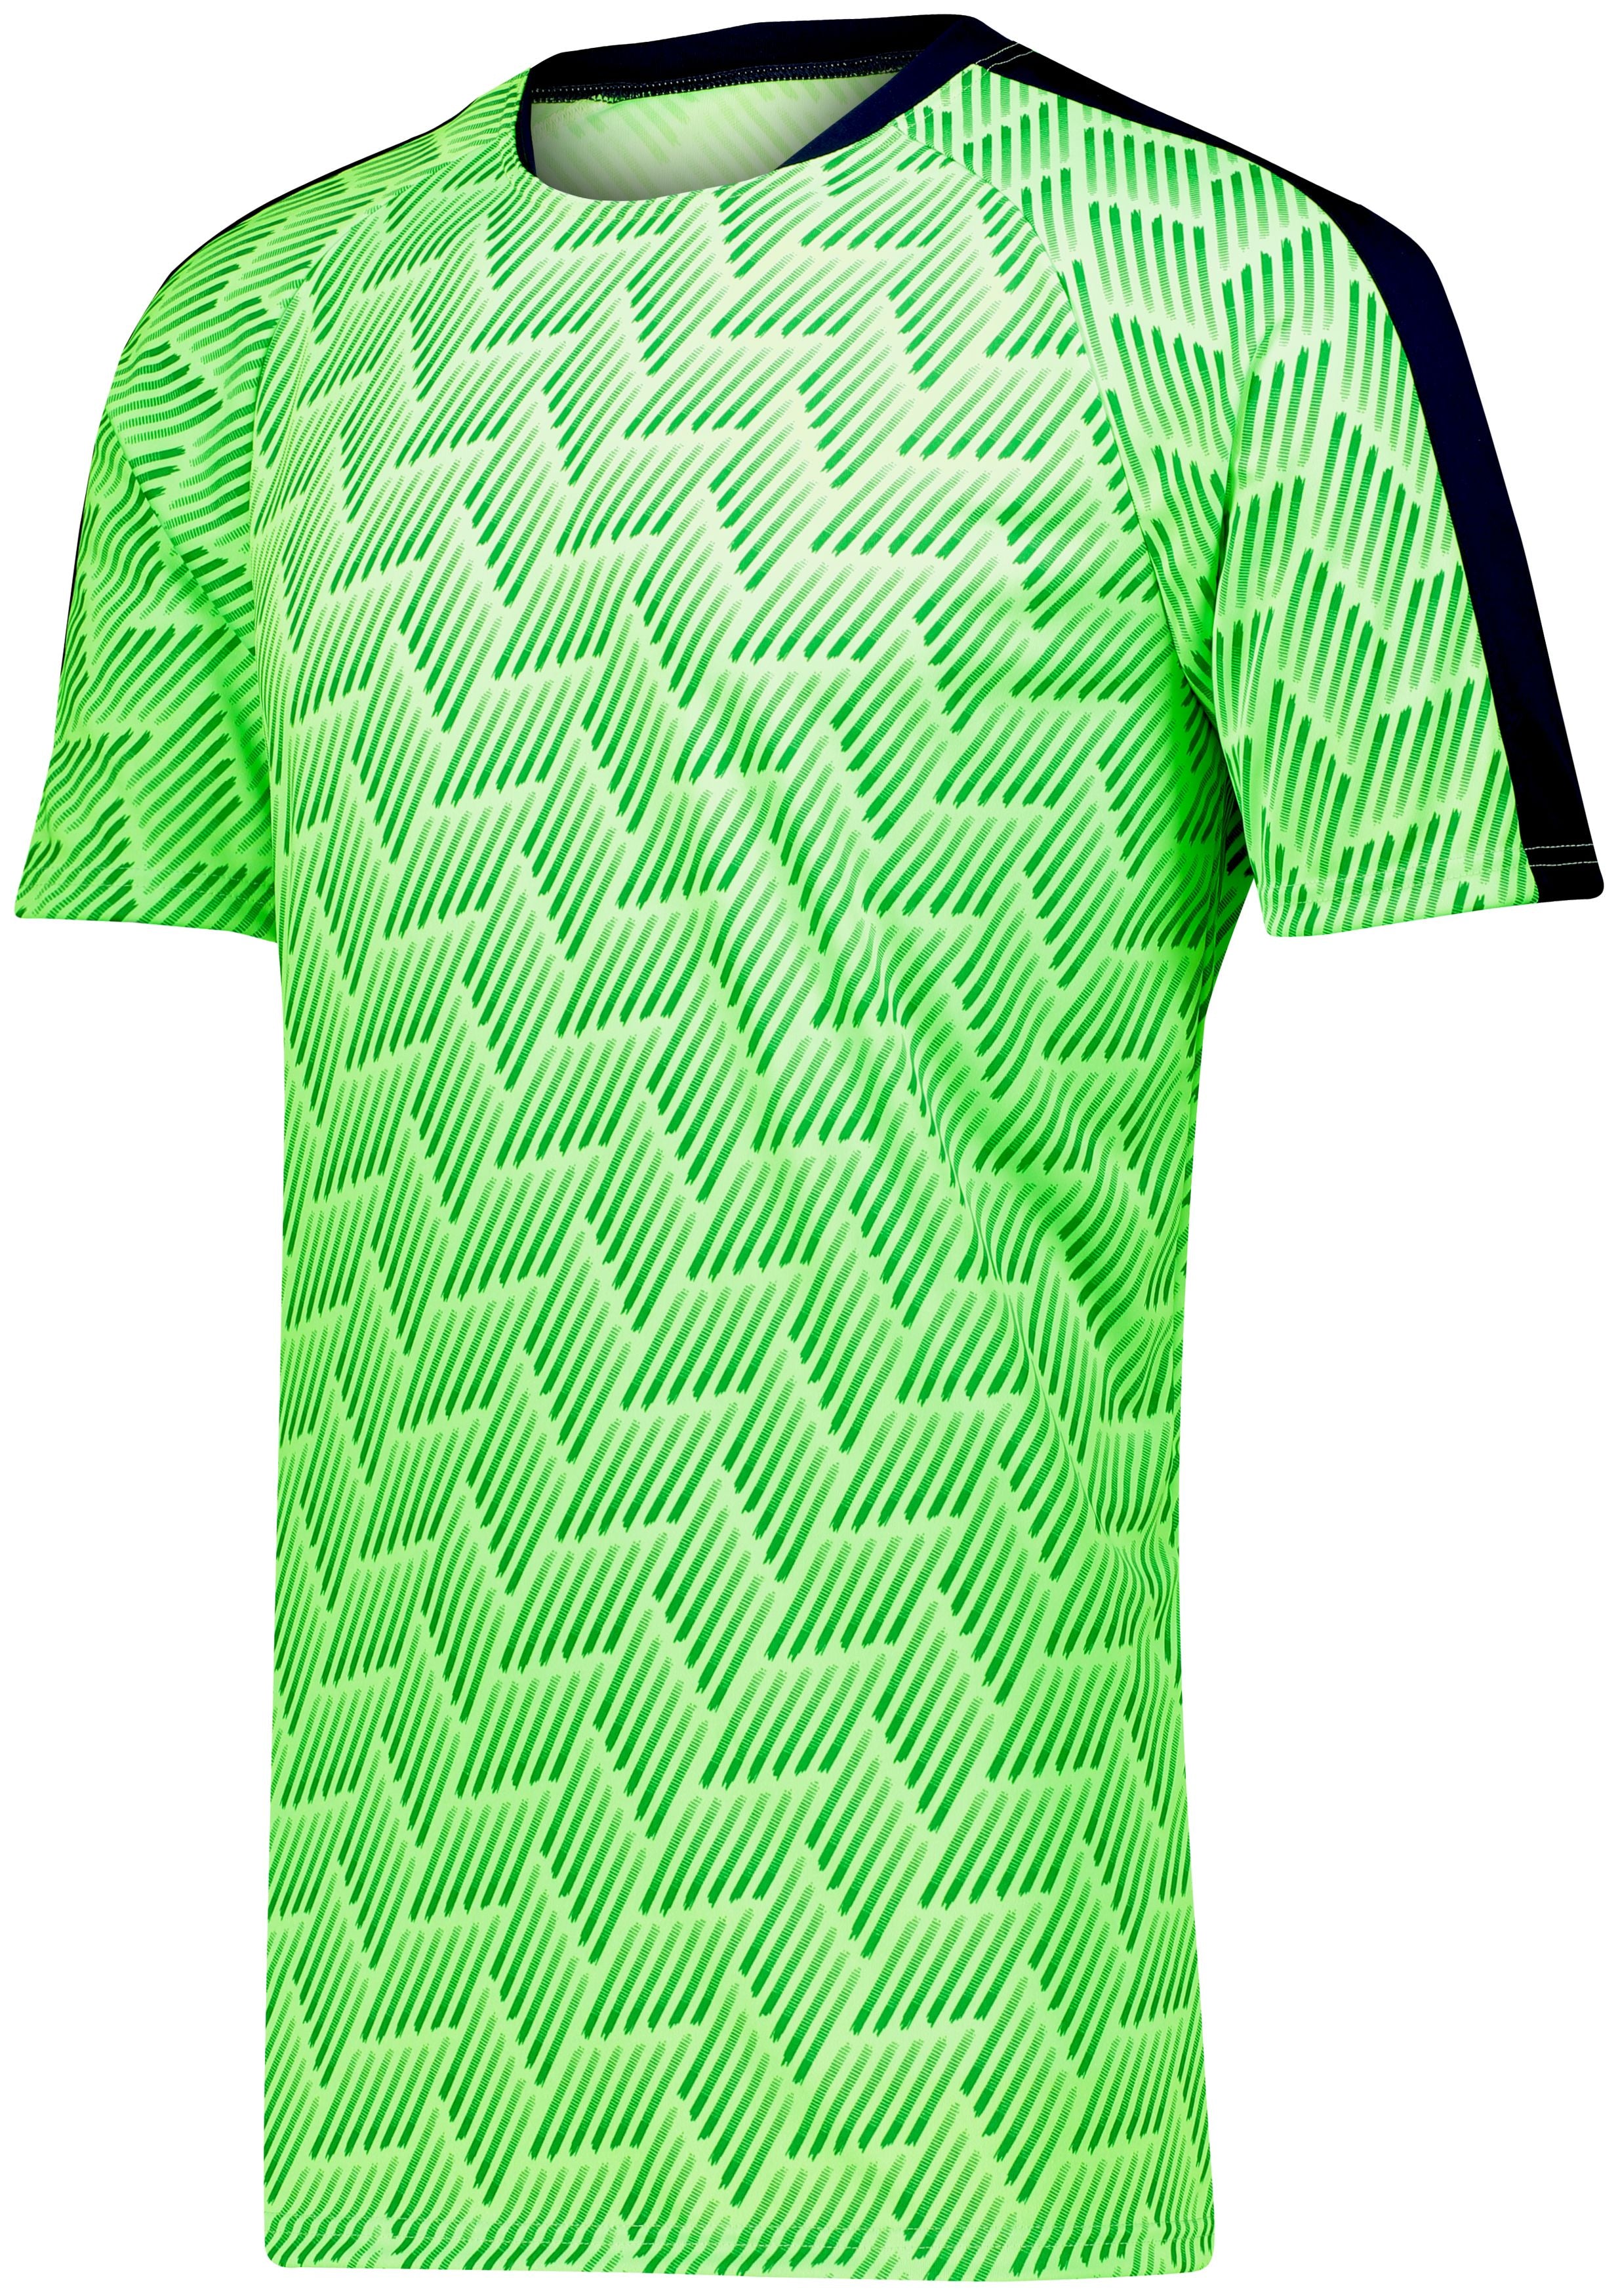 High 5 Youth Hypervolt Jersey in Lime Print/Navy  -Part of the Youth, Youth-Jersey, High5-Products, Soccer, Shirts, All-Sports-1 product lines at KanaleyCreations.com